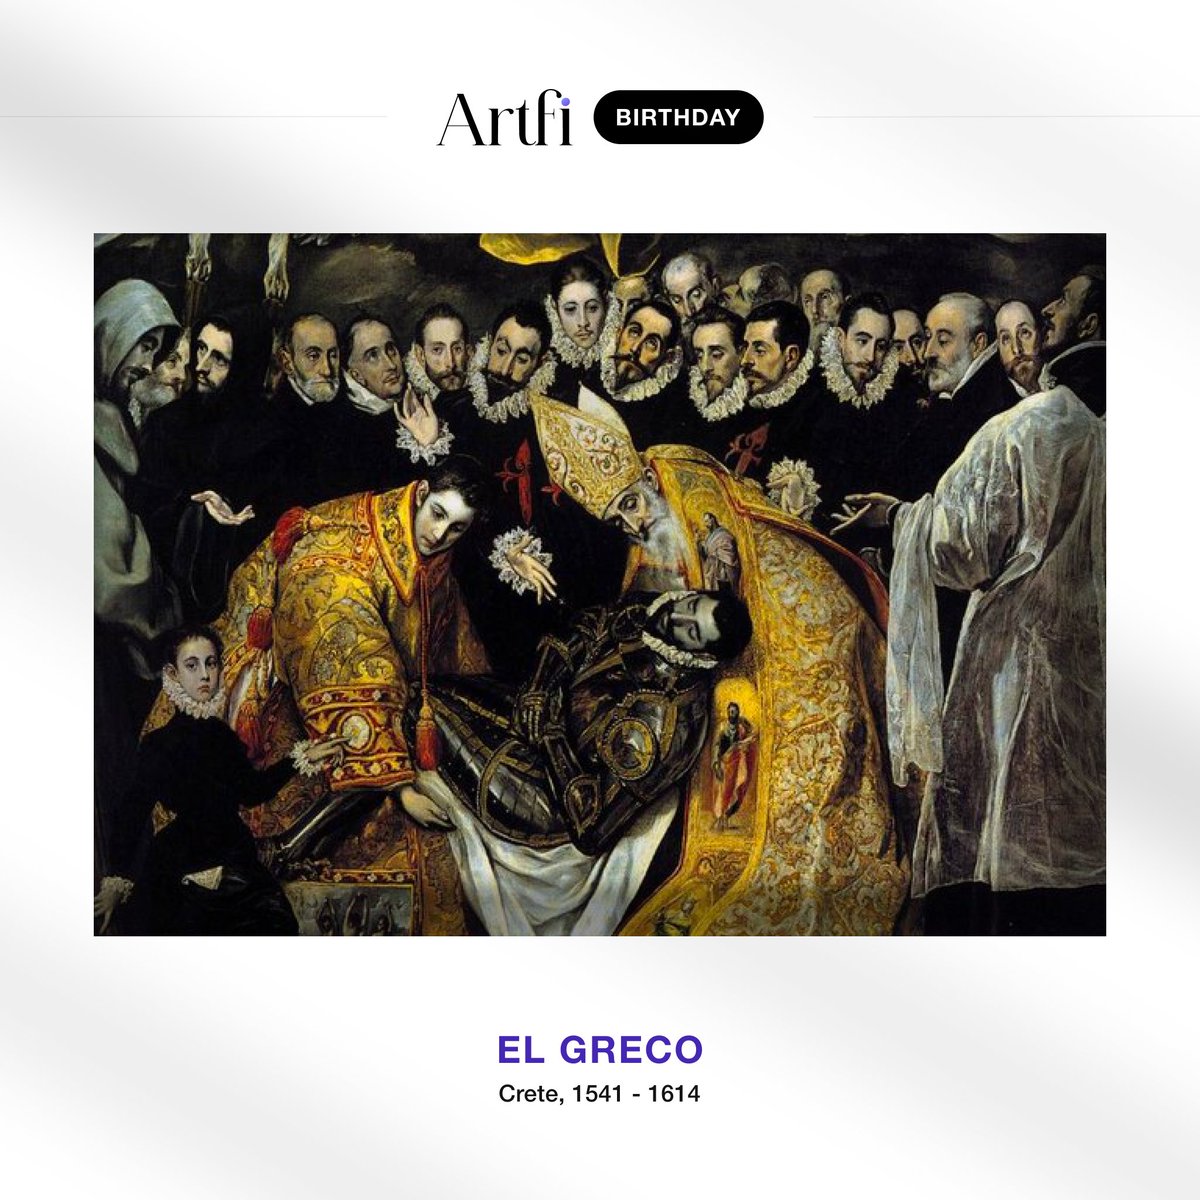 El Greco, the Greek-Spanish painter known for his unique style, was born on this day in 1541. His interest in depicting spiritual + mystical subjects made him one of the leading painters of the Spanish Renaissance. #ElGreco #SpanishArt #RenaissanceArt #ArtHistory